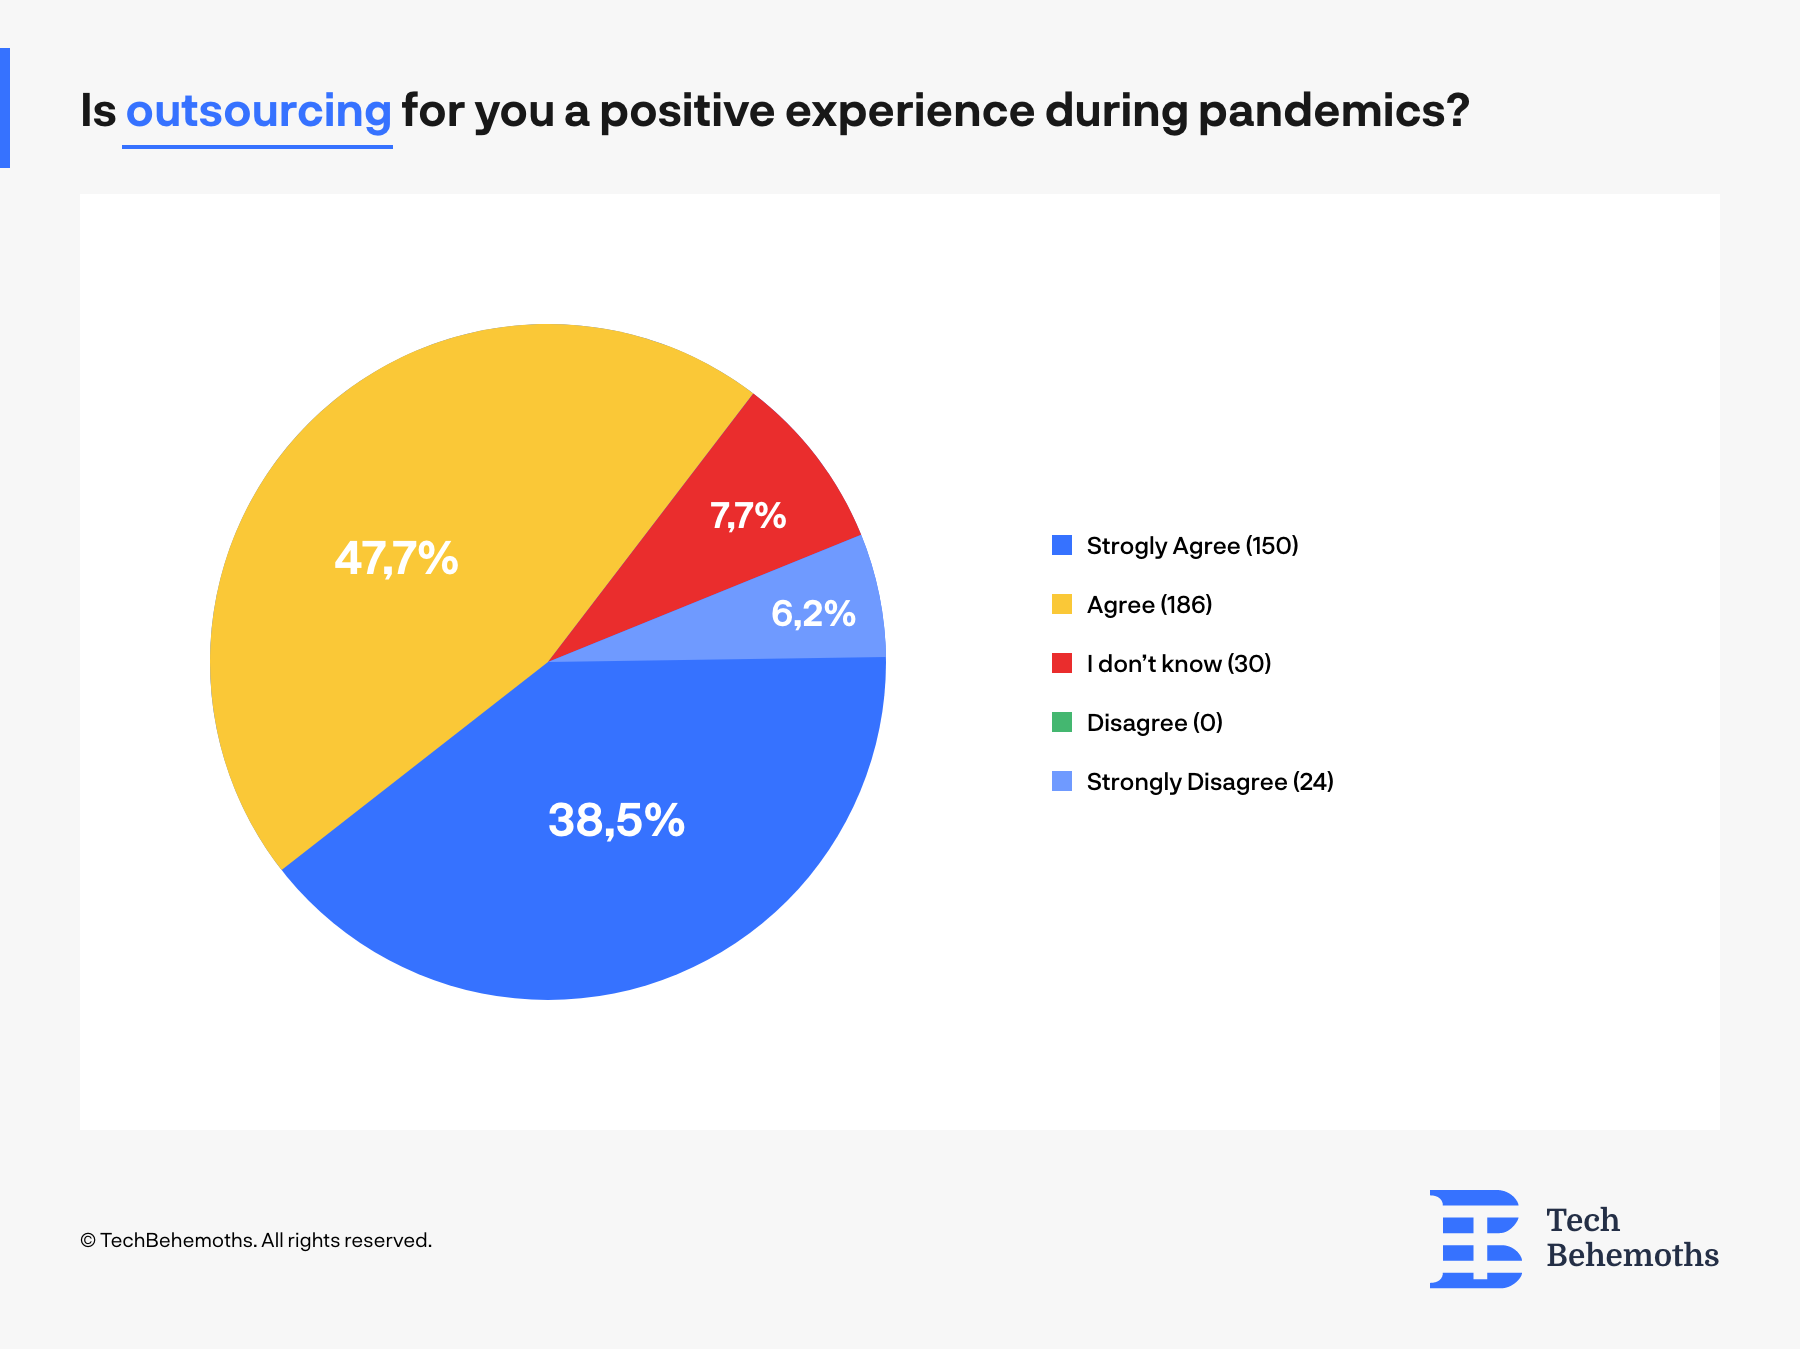 outsourcing as an experience during the pandemic